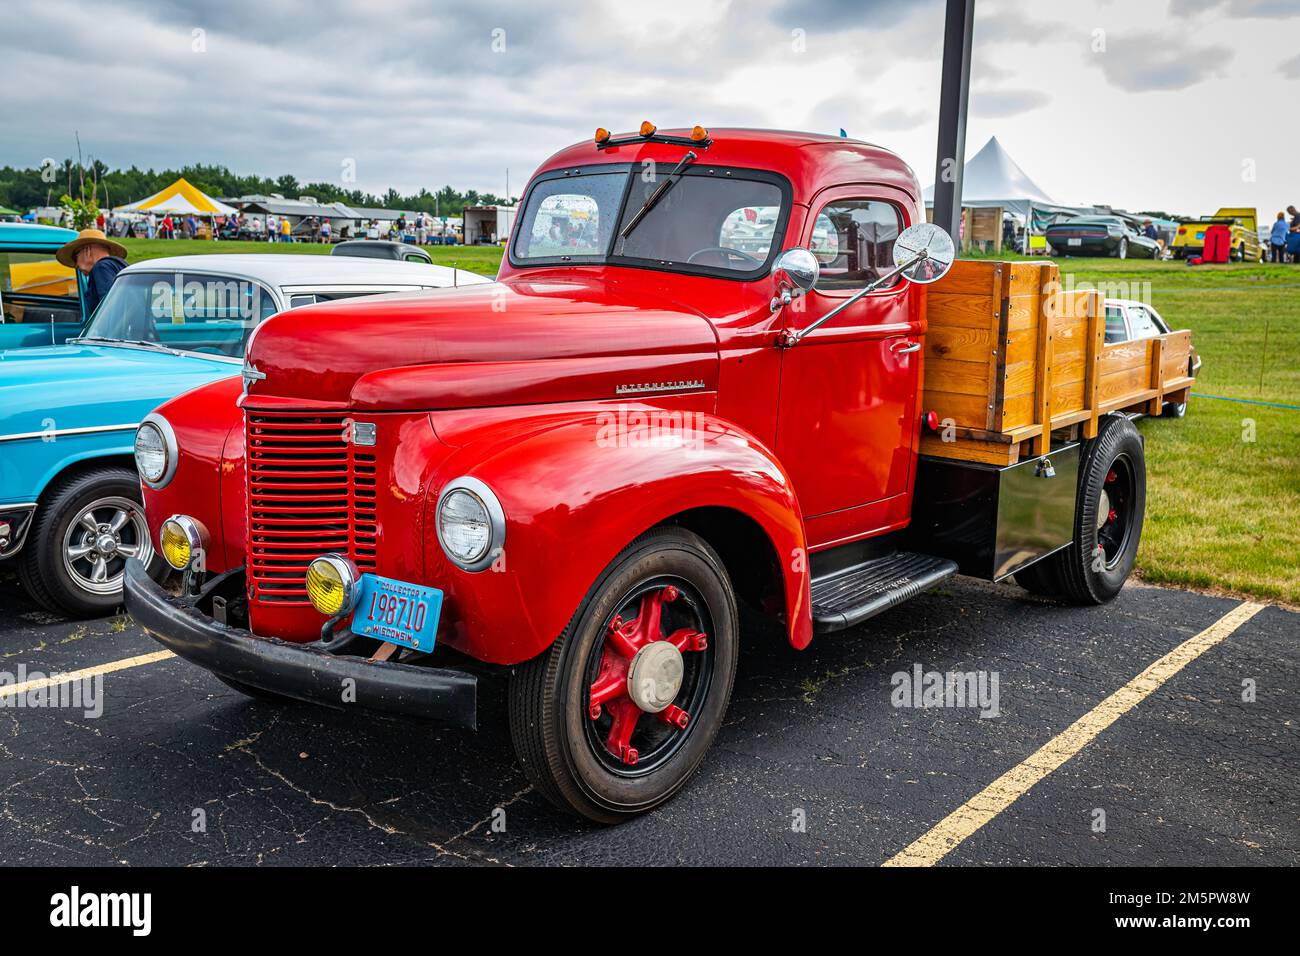 Iola, WI - July 07, 2022: High perspective front corner view of a 1946 International Harvester KB-1 Pickup Truck at a local car show. Stock Photo